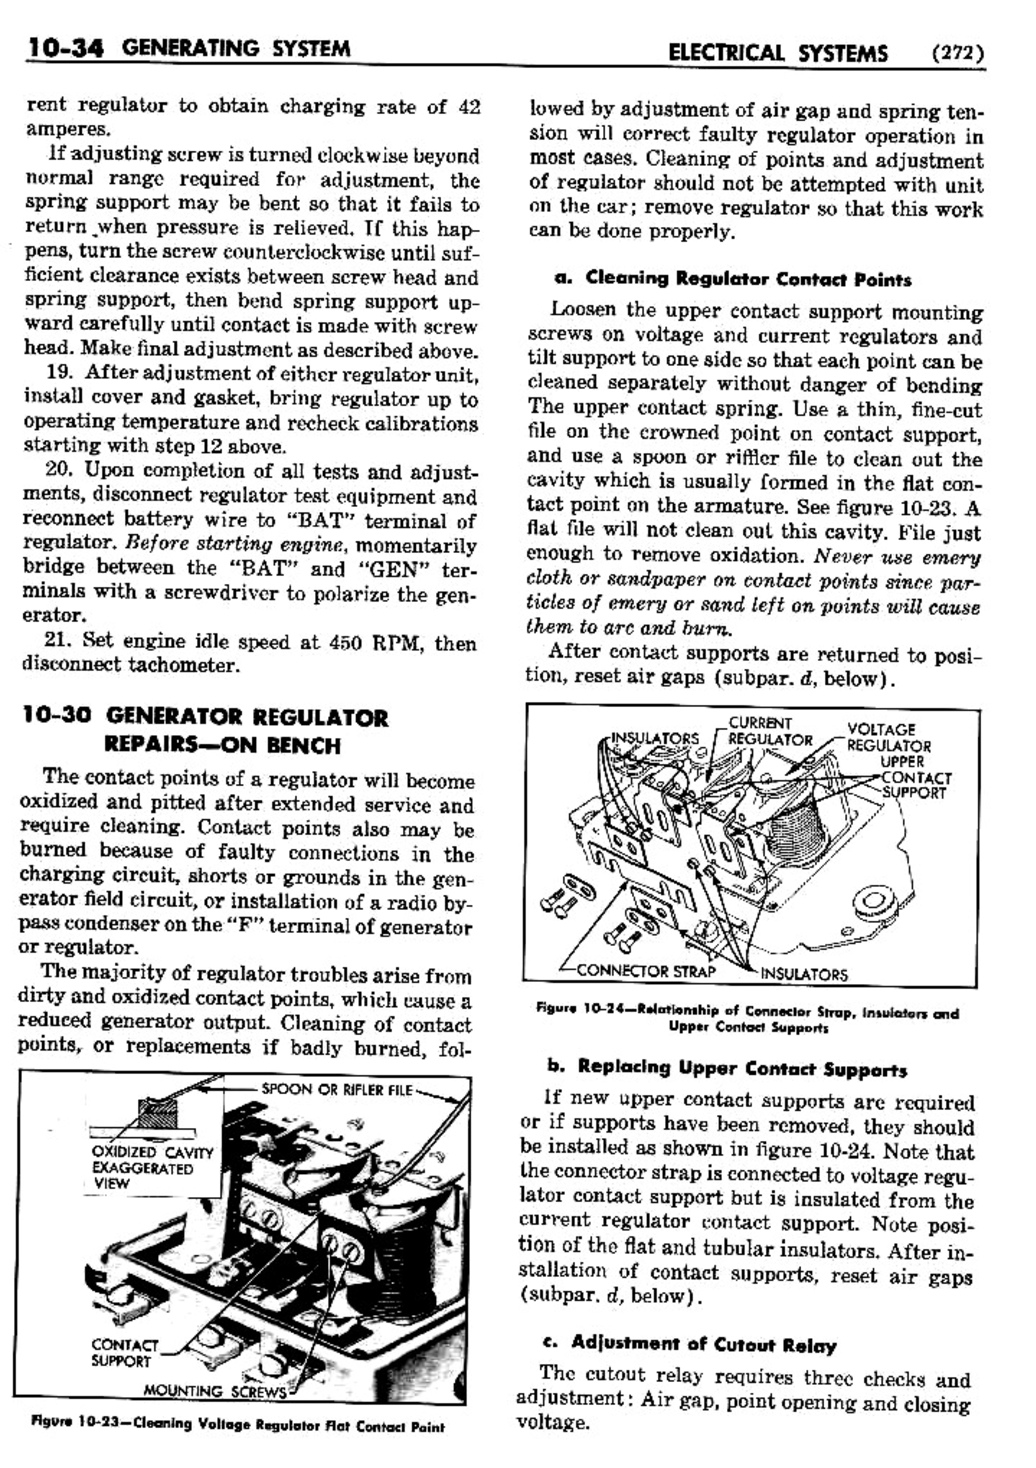 n_11 1950 Buick Shop Manual - Electrical Systems-034-034.jpg